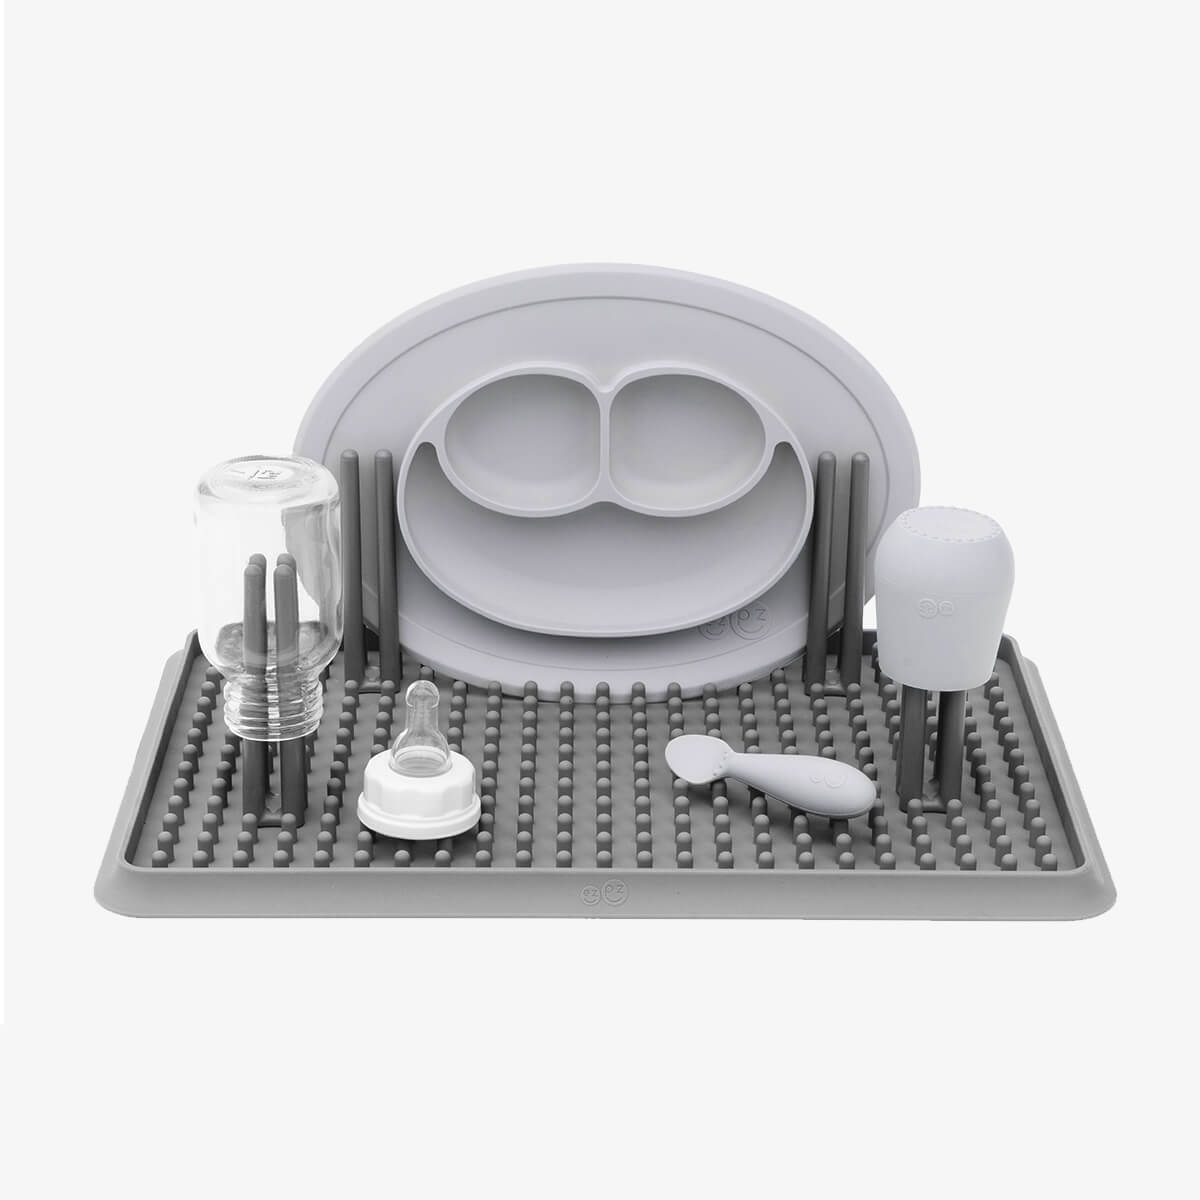 The Drying Rack in Gray by ezpz / Odor-Resistant, 100% Silicone Drying Rack